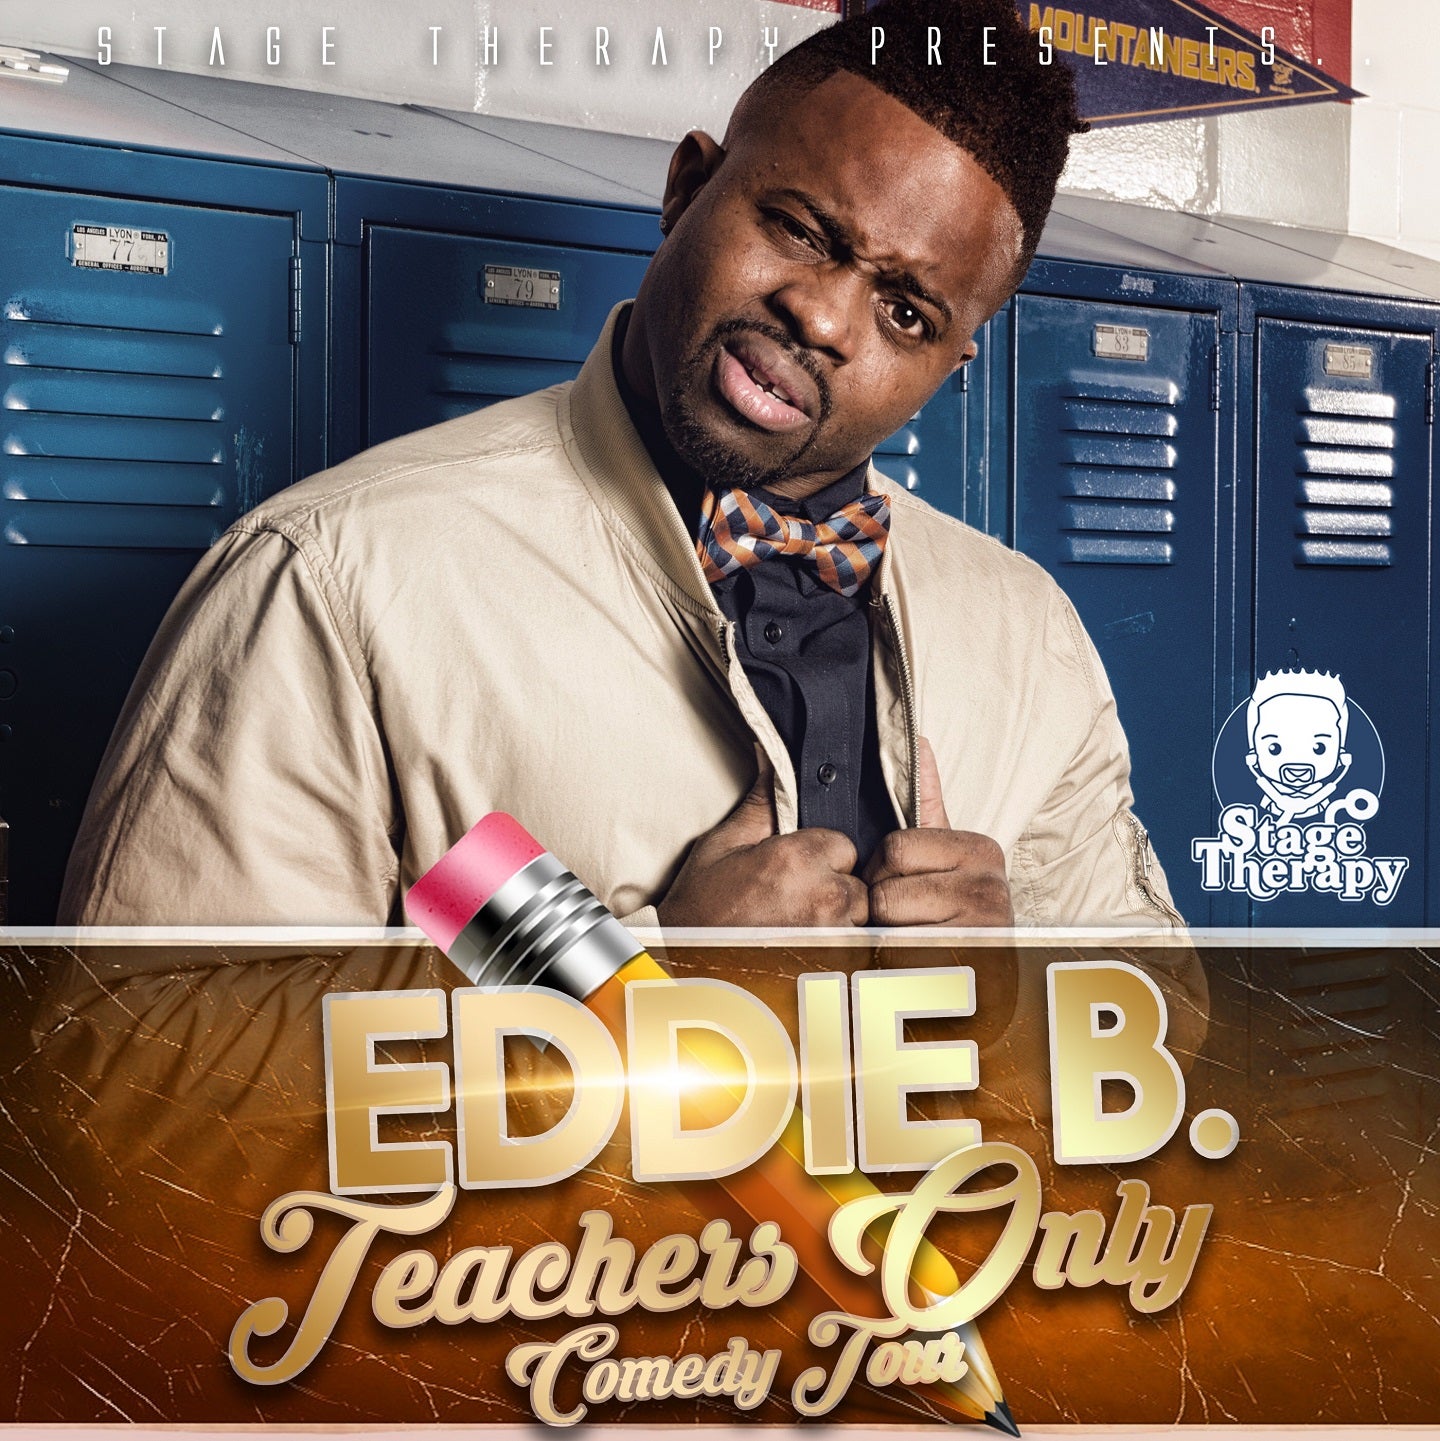 teachers only comedy tour